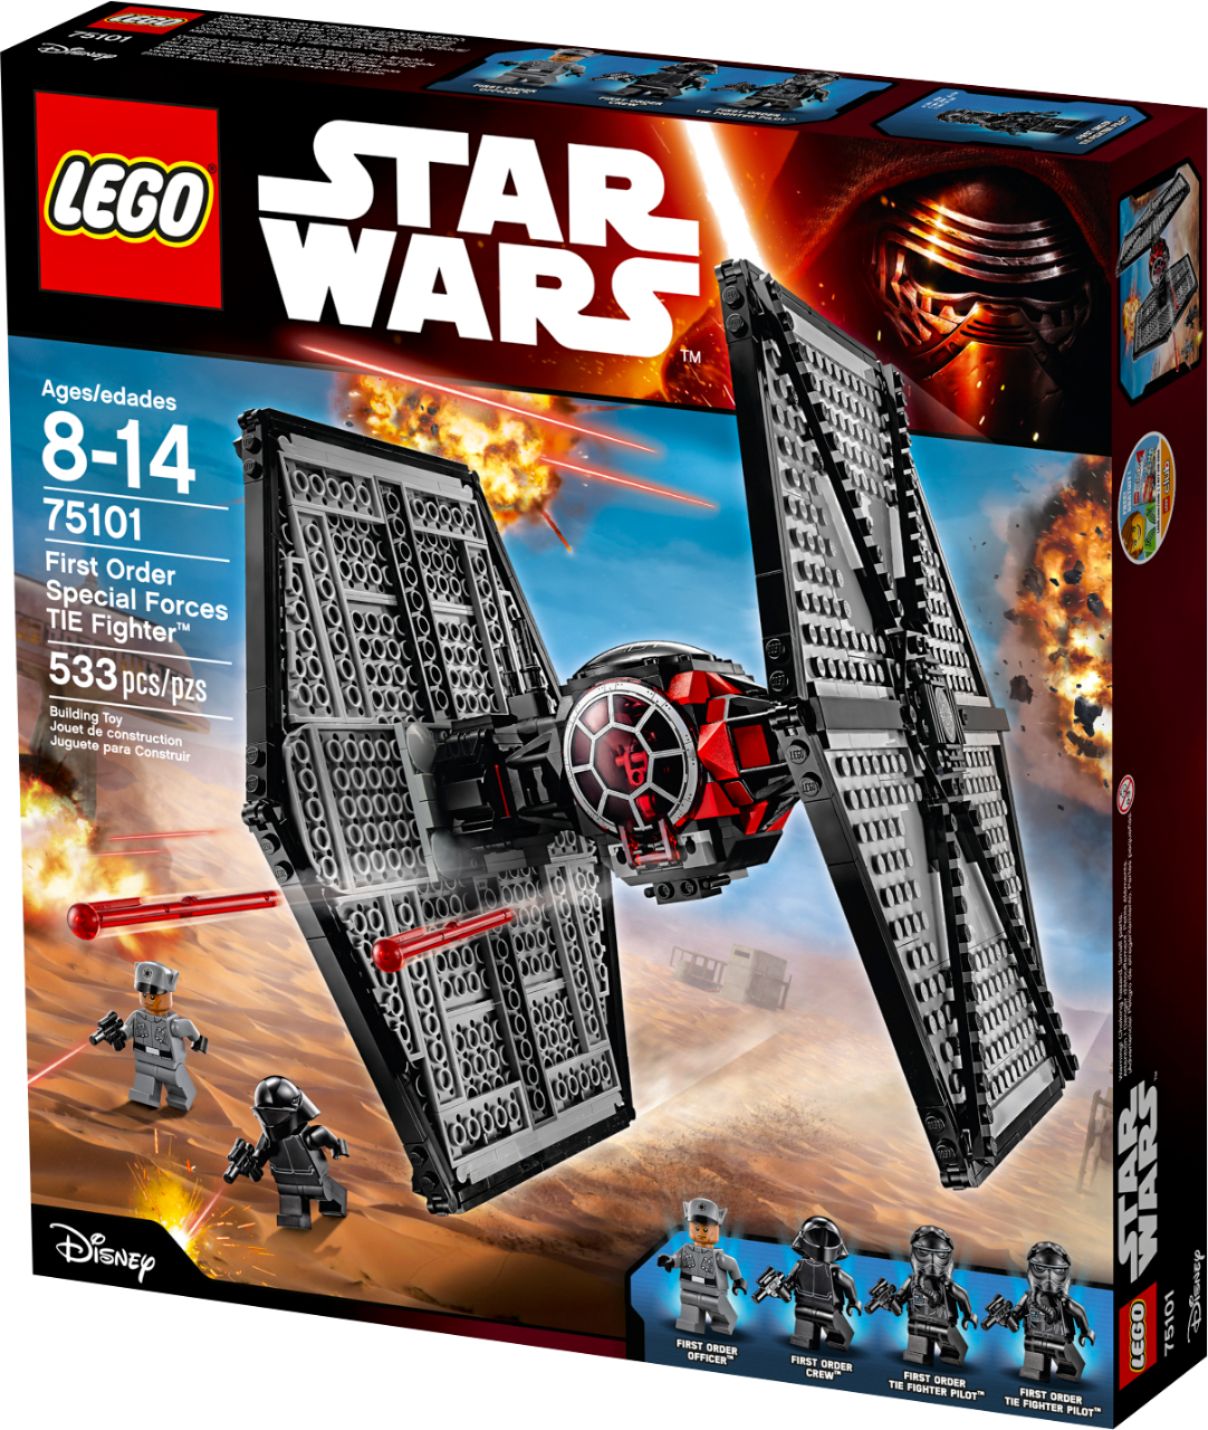 This Star Wars LEGO TIE Fighter is a perfect gift thanks to a